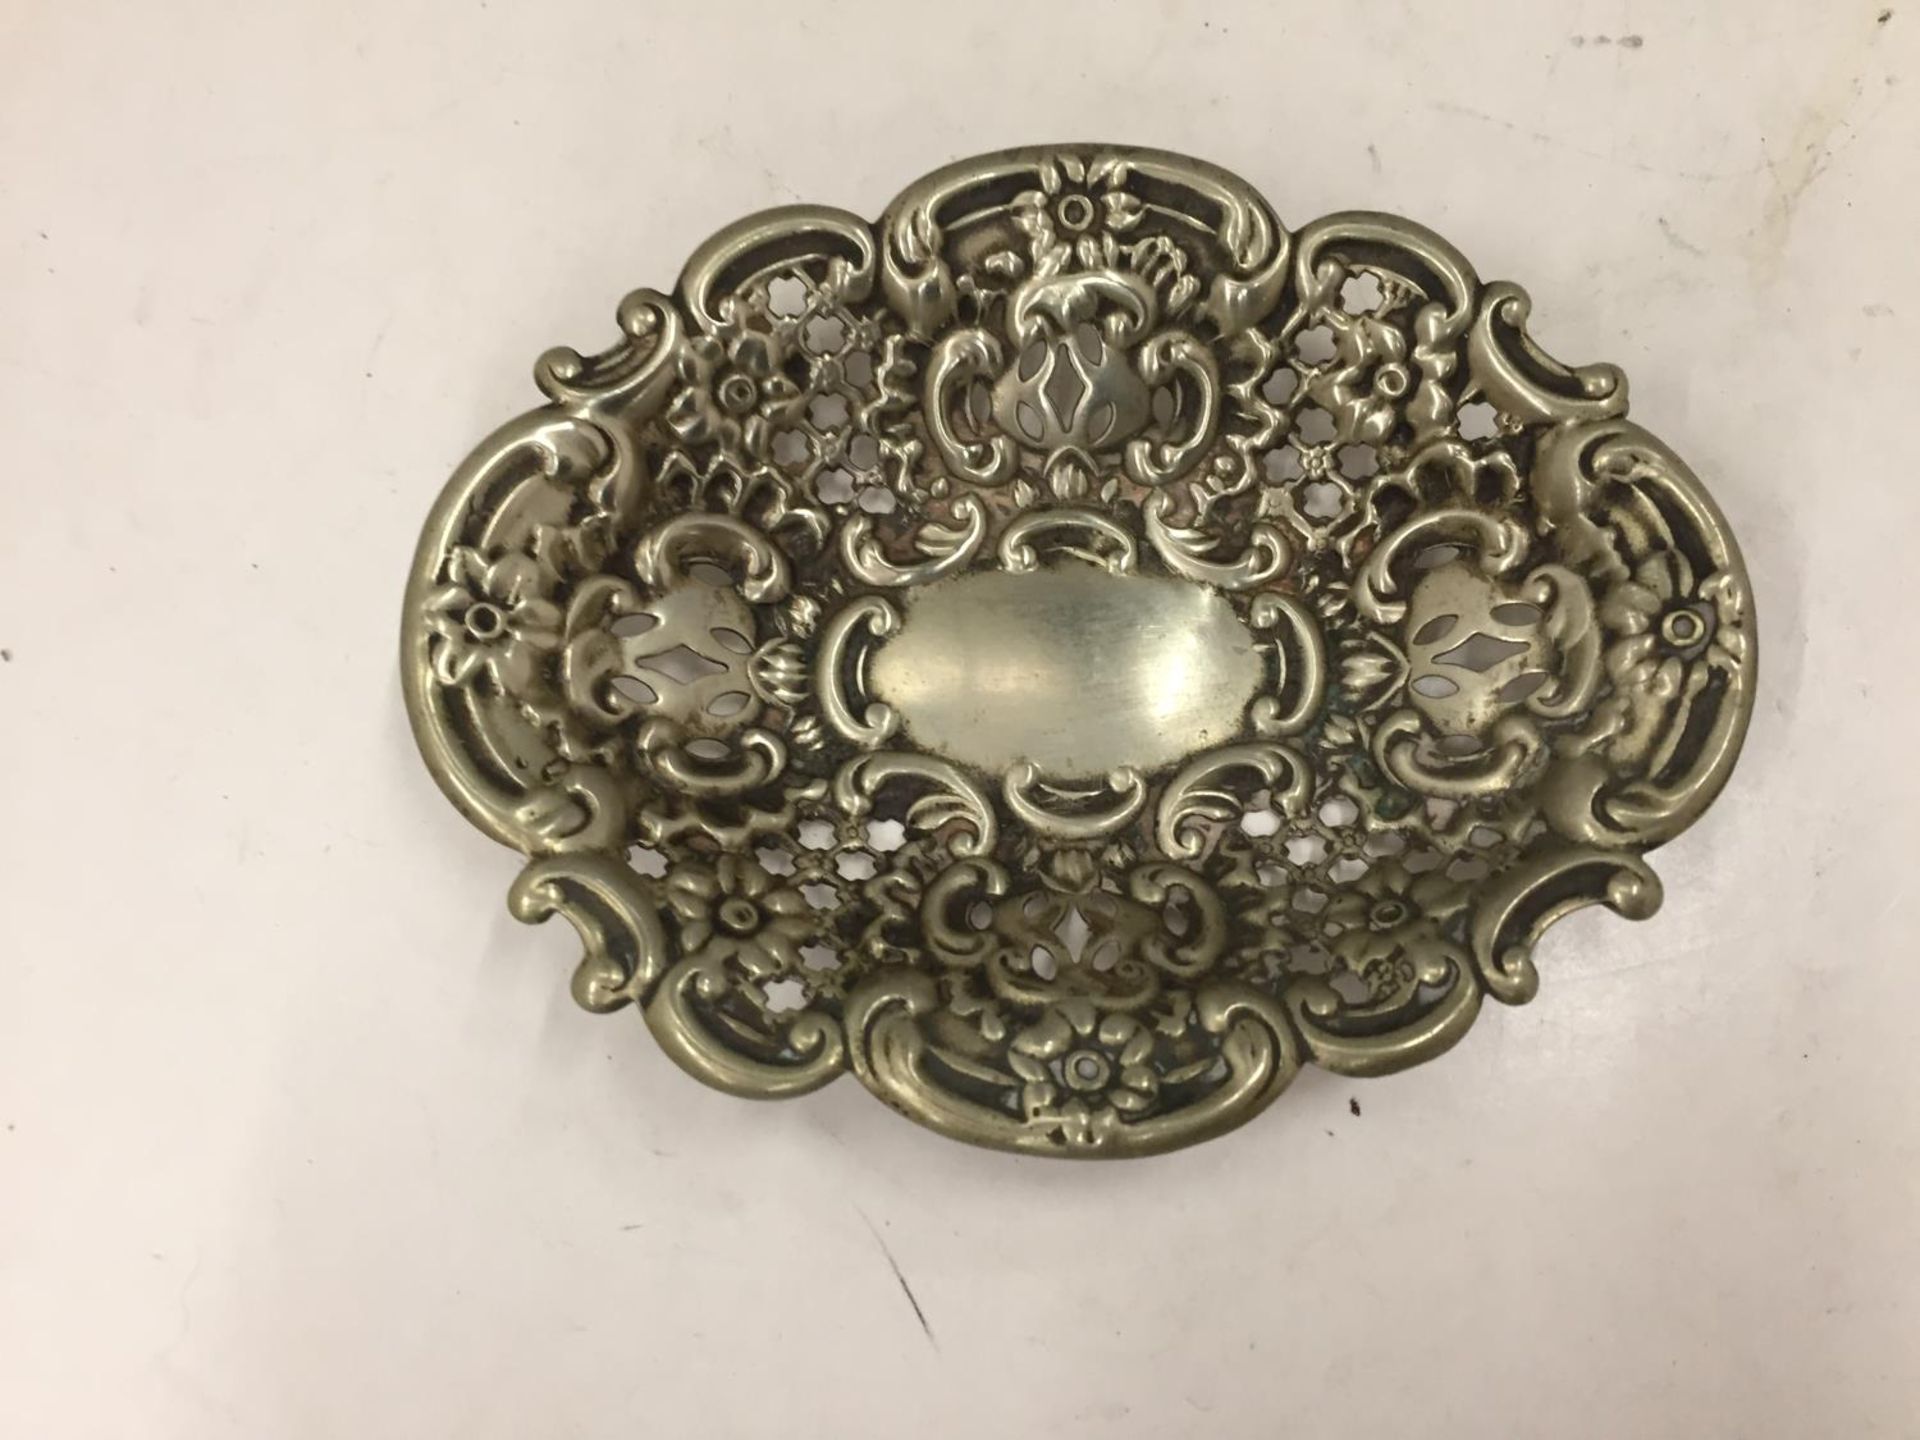 A DECORATIVE WHITE METAL DISH - Image 2 of 3